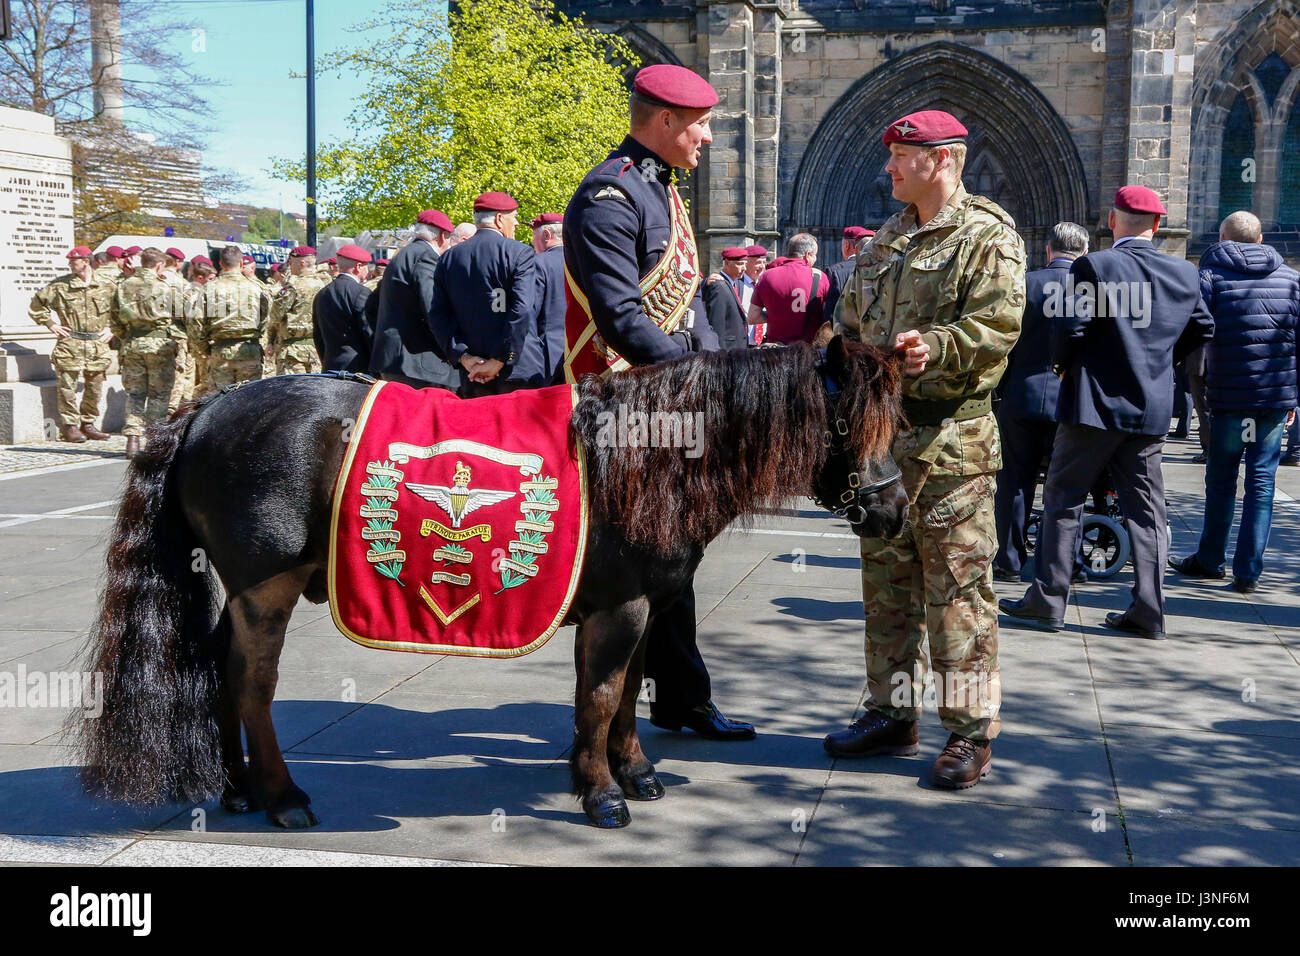 Glasgow, Scotland, UK. 6th May, 2017. To commemorate the 70th anniversary of the forming of XV (Scottish Volunteer) battalion of the Parachute Regiment, later to be known as '4 Para', a service was held at Glasgow cathedral folllowed by a march through the city, led by the Parachute Regiments mascot, a Shetland pony called Pegasus. The march finished in George Square where there as a march past and salute followed by an address by Lt Colonel Pat Conn OBE. Credit: Findlay/Alamy Live News Stock Photo